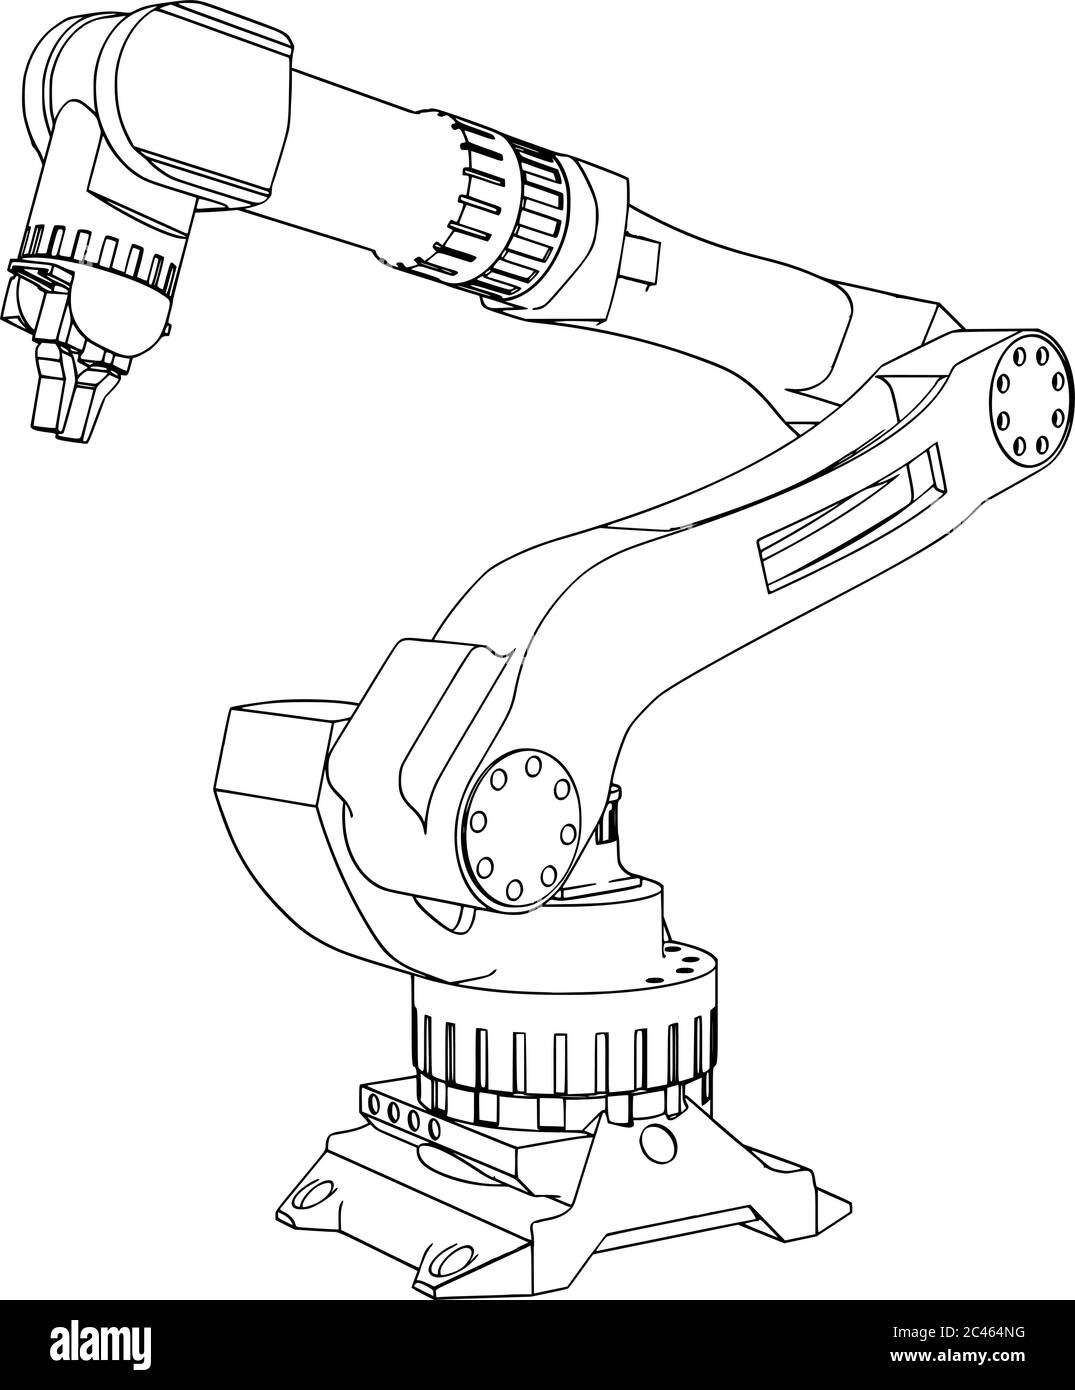 Cool Cool robot drill arm sketch drawing for App